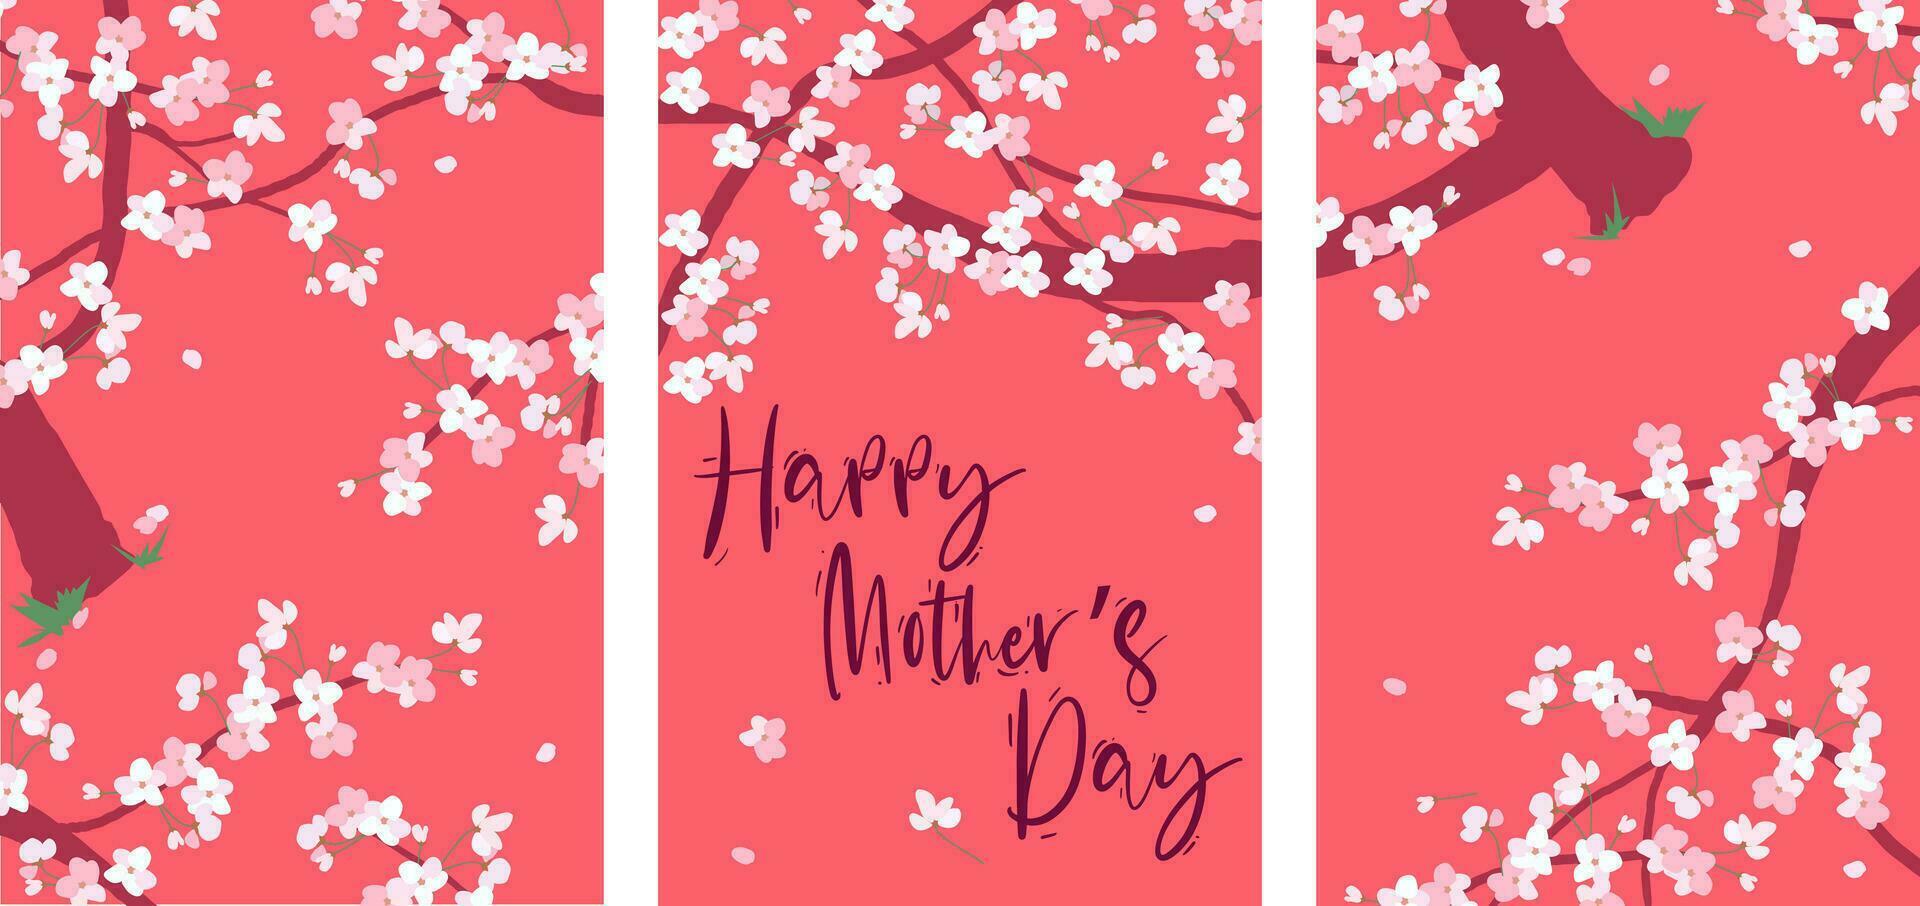 Illustration of cherry trees on a red background. Festive banner for mother's day. Spring pink flowers. Vektor graphic of Sakura. vector